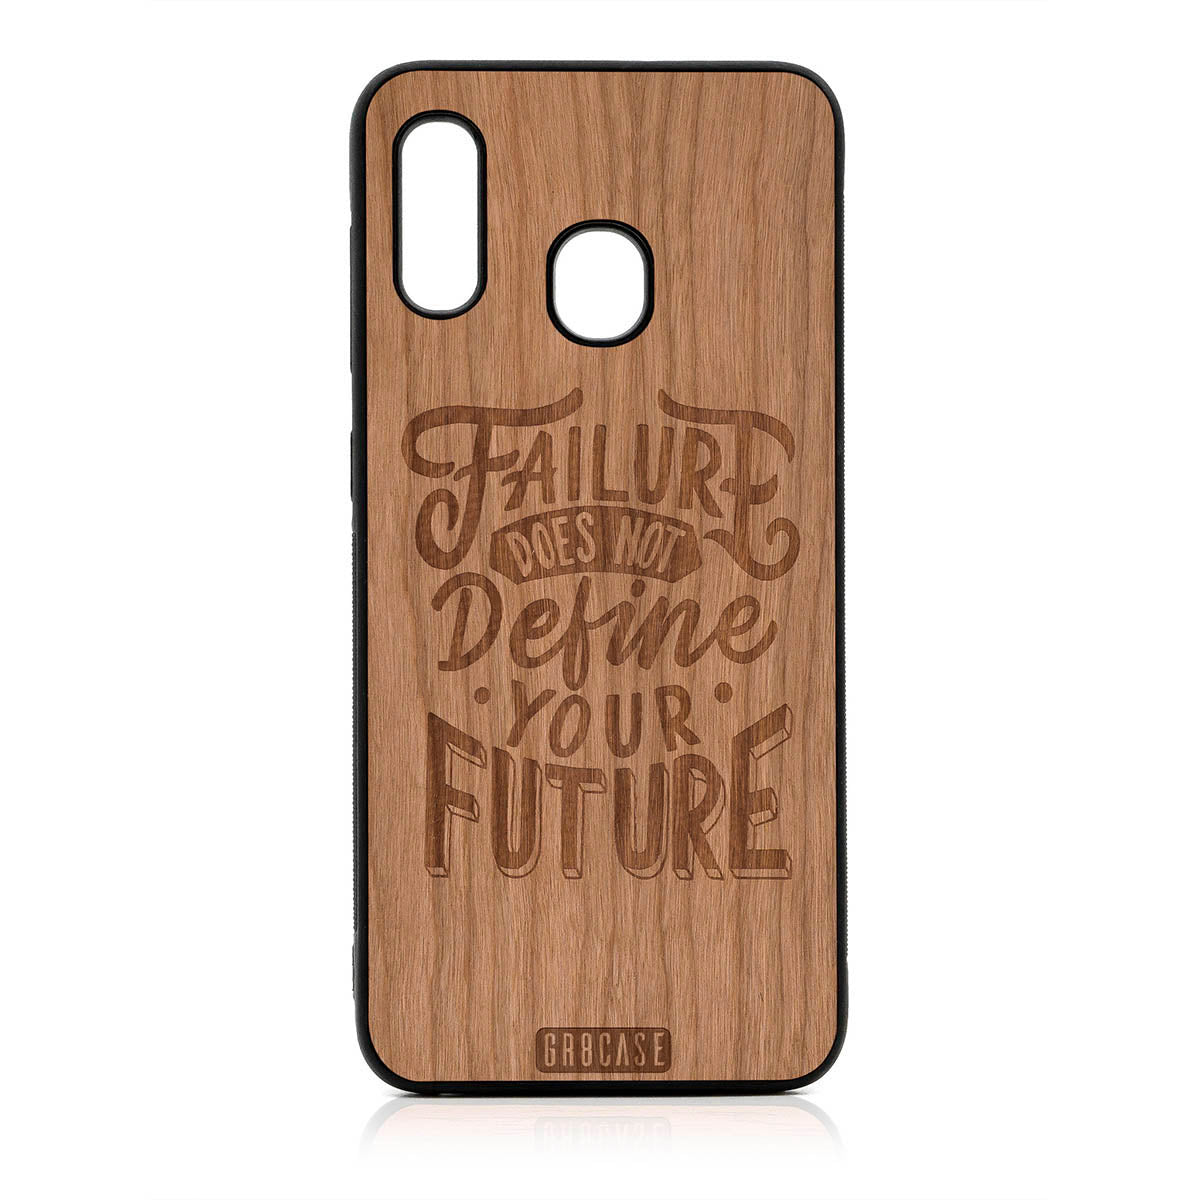 Failure Does Not Define You Future Design Wood Case For Samsung Galaxy A20 by GR8CASE